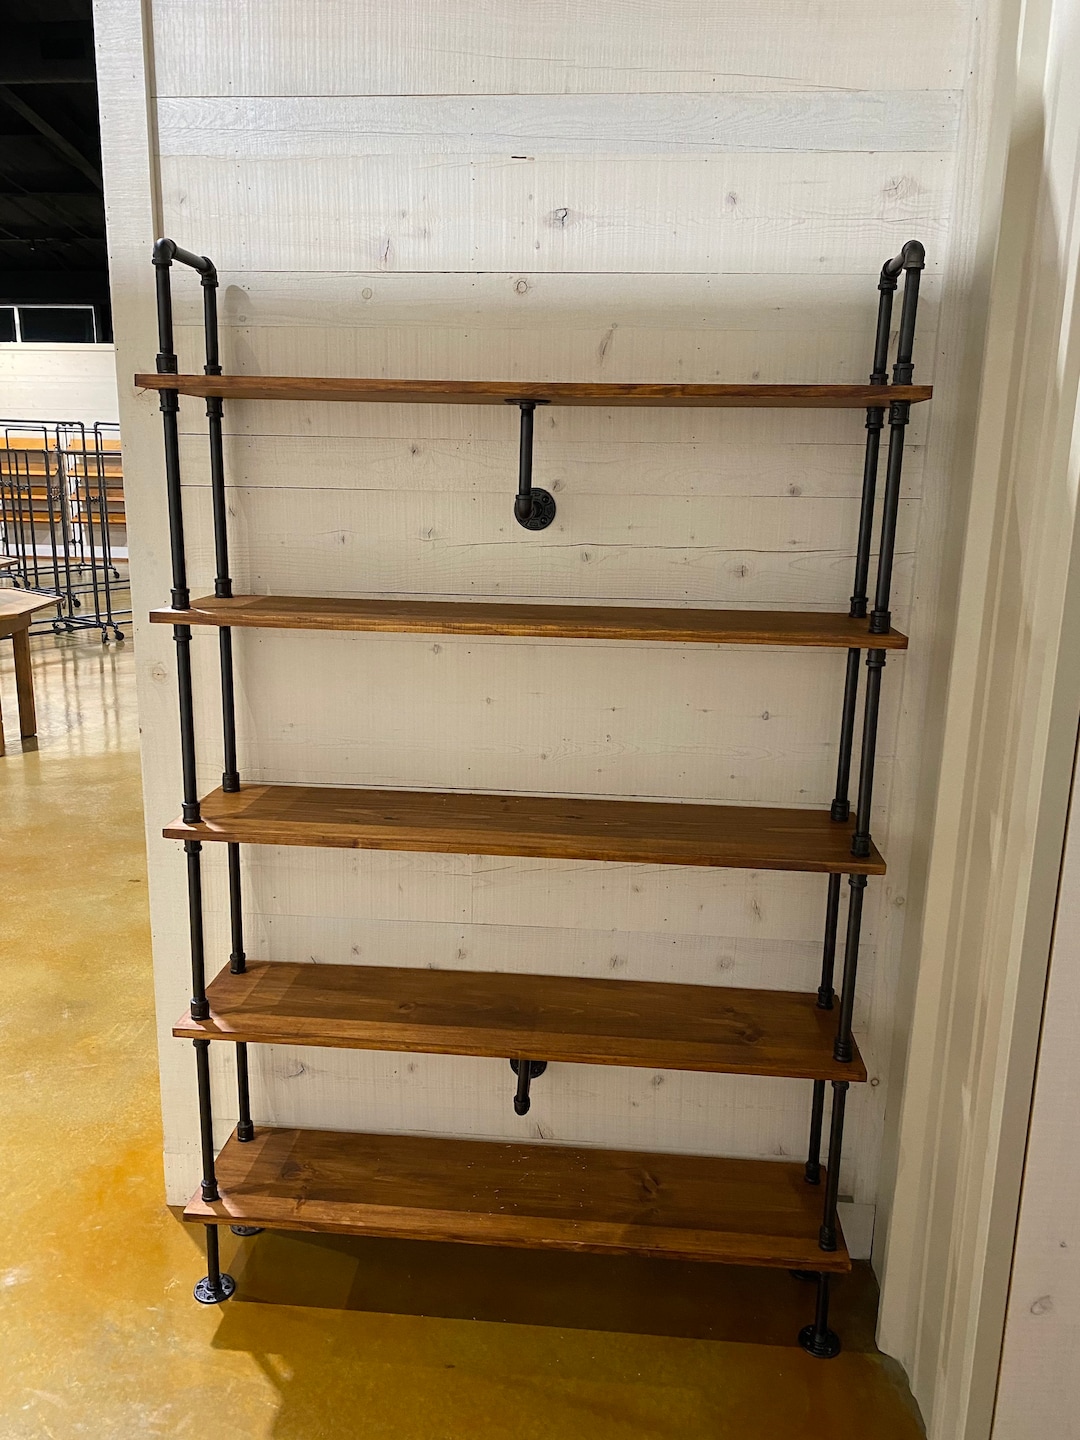 7 Shelf Industrial Style Shoe Rack Display Rack Bookcase With Steampunk  Style Decorative Handles NEW LOWER PRICES 